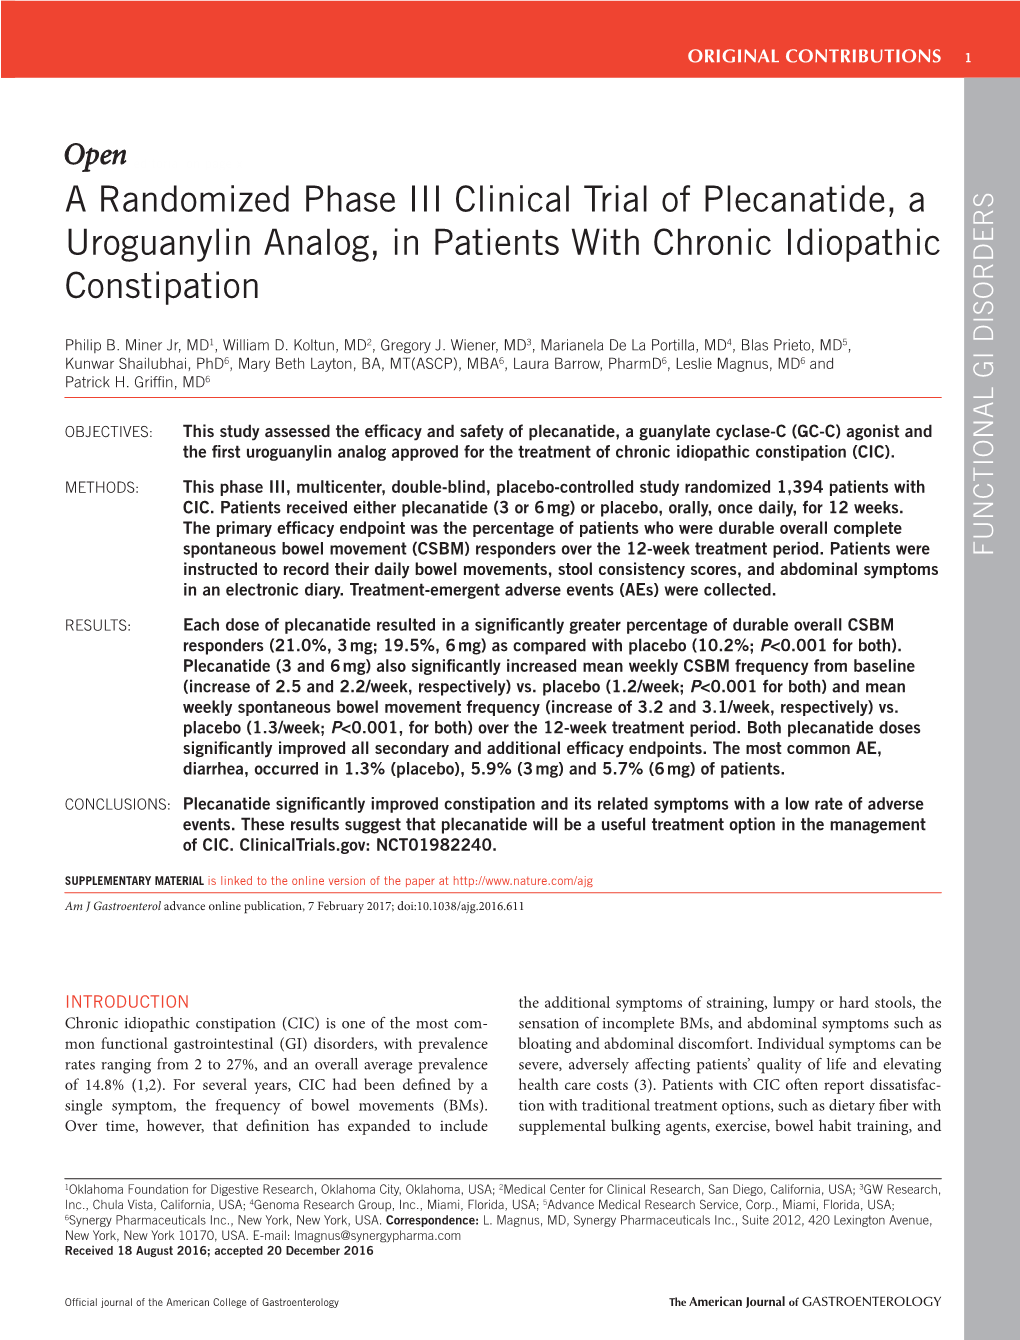 A Randomized Phase III Clinical Trial of Plecanatide, a Uroguanylin Analog, in Patients with Chronic Idiopathic Constipation